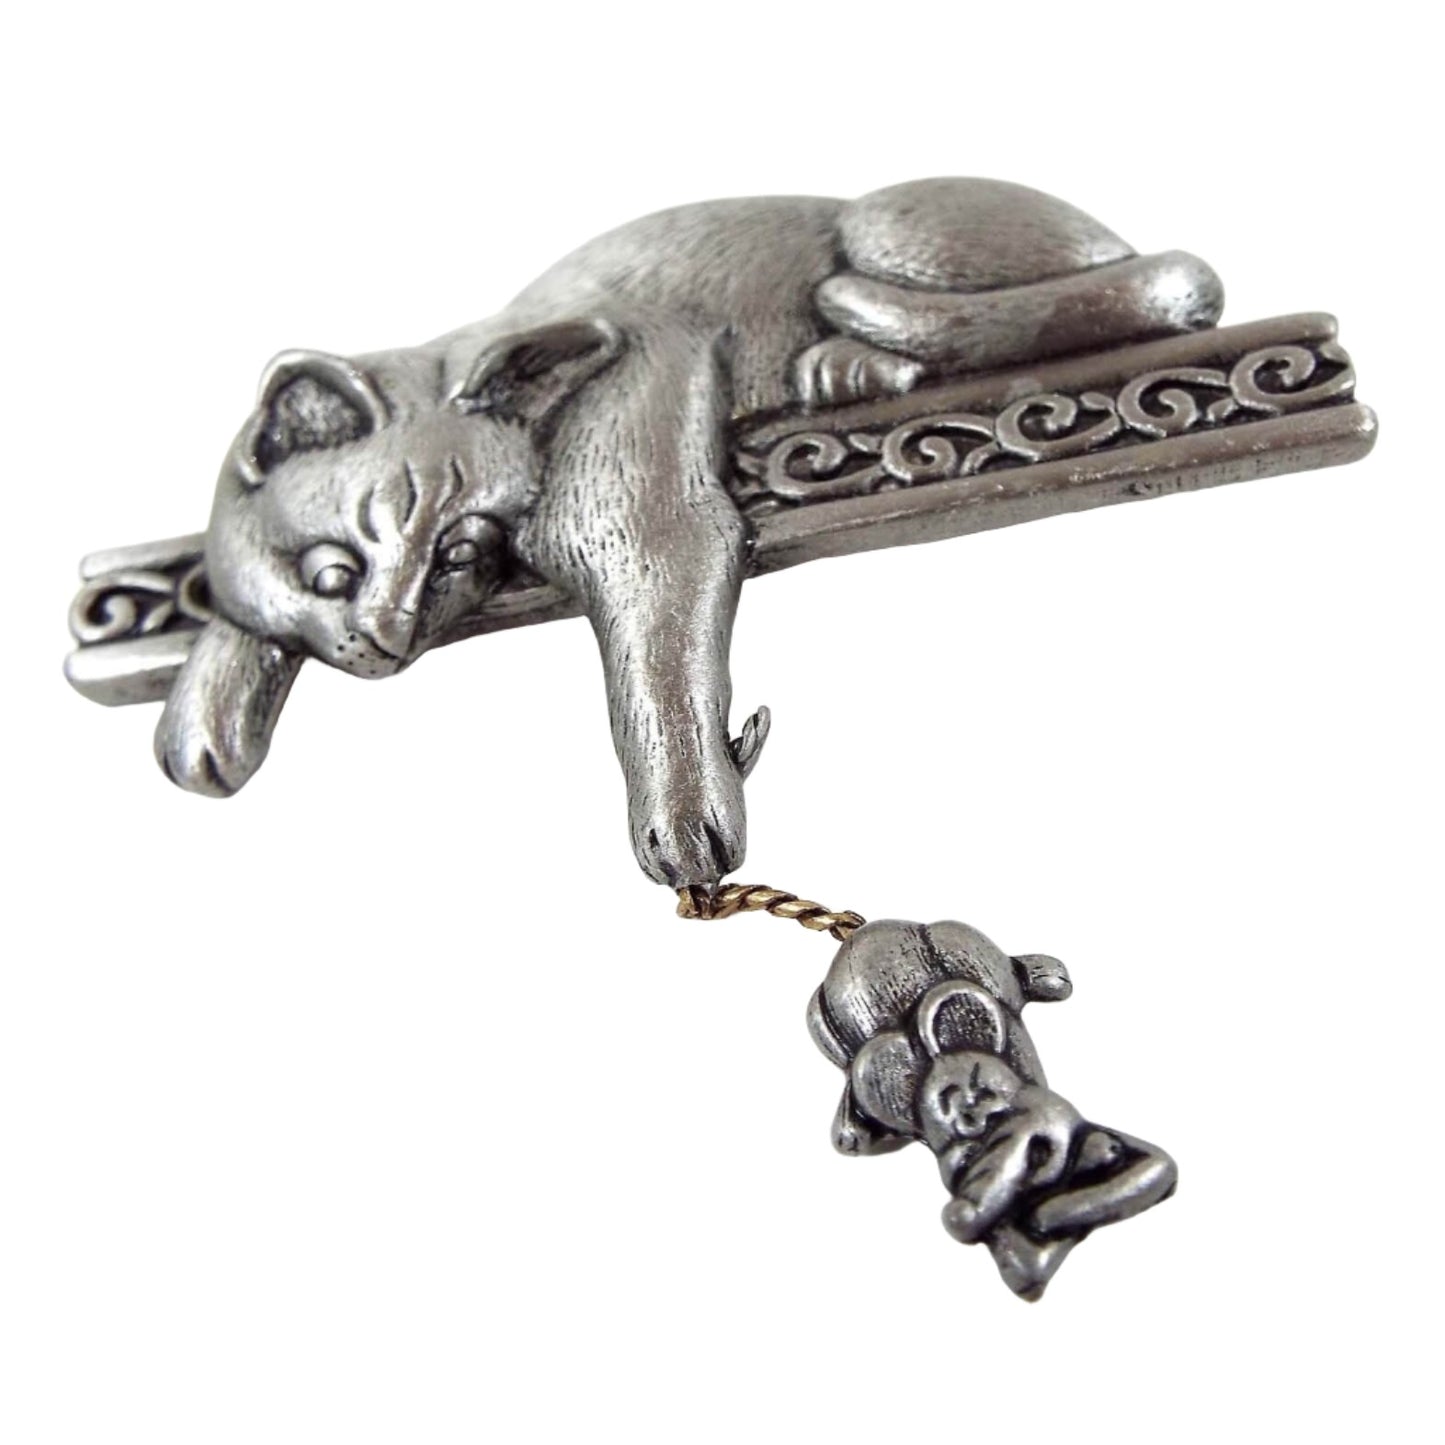 Front view of the retro vintage JJ brooch. The brooch is matte pewter gray color. On the top is a 3D style cat peering down at a mouse and holding it by the tail. The cat is laying on a bar with fancy scroll work design and his paw is hanging down past it. The mouse has a twisted metal tail and has an angry look on his face with his arms folded over one another.